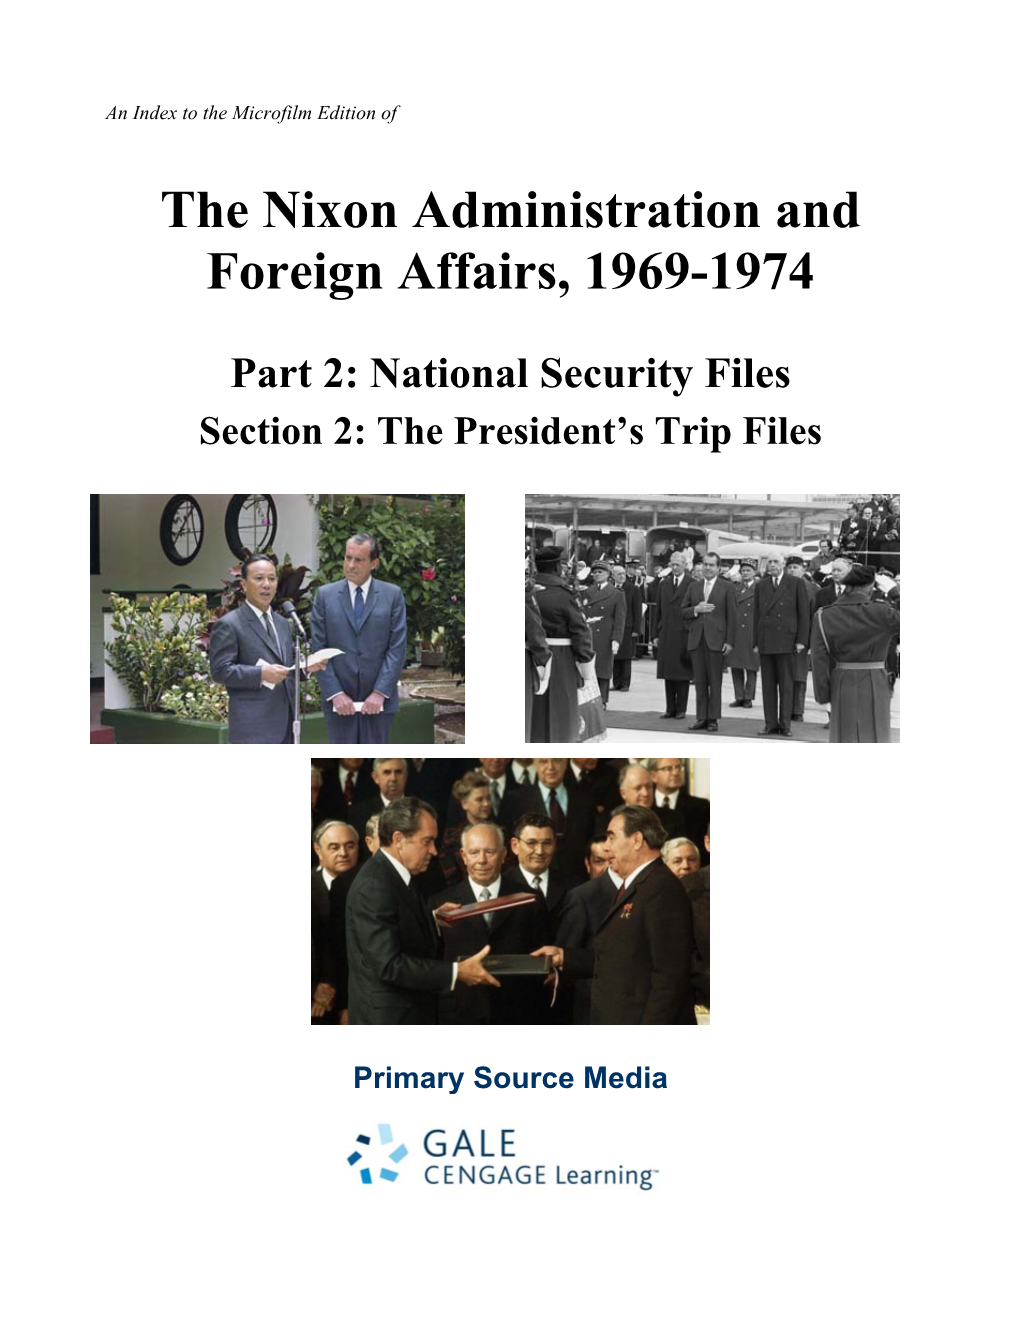 The Nixon Administration and Foreign Affairs, 1969-1974